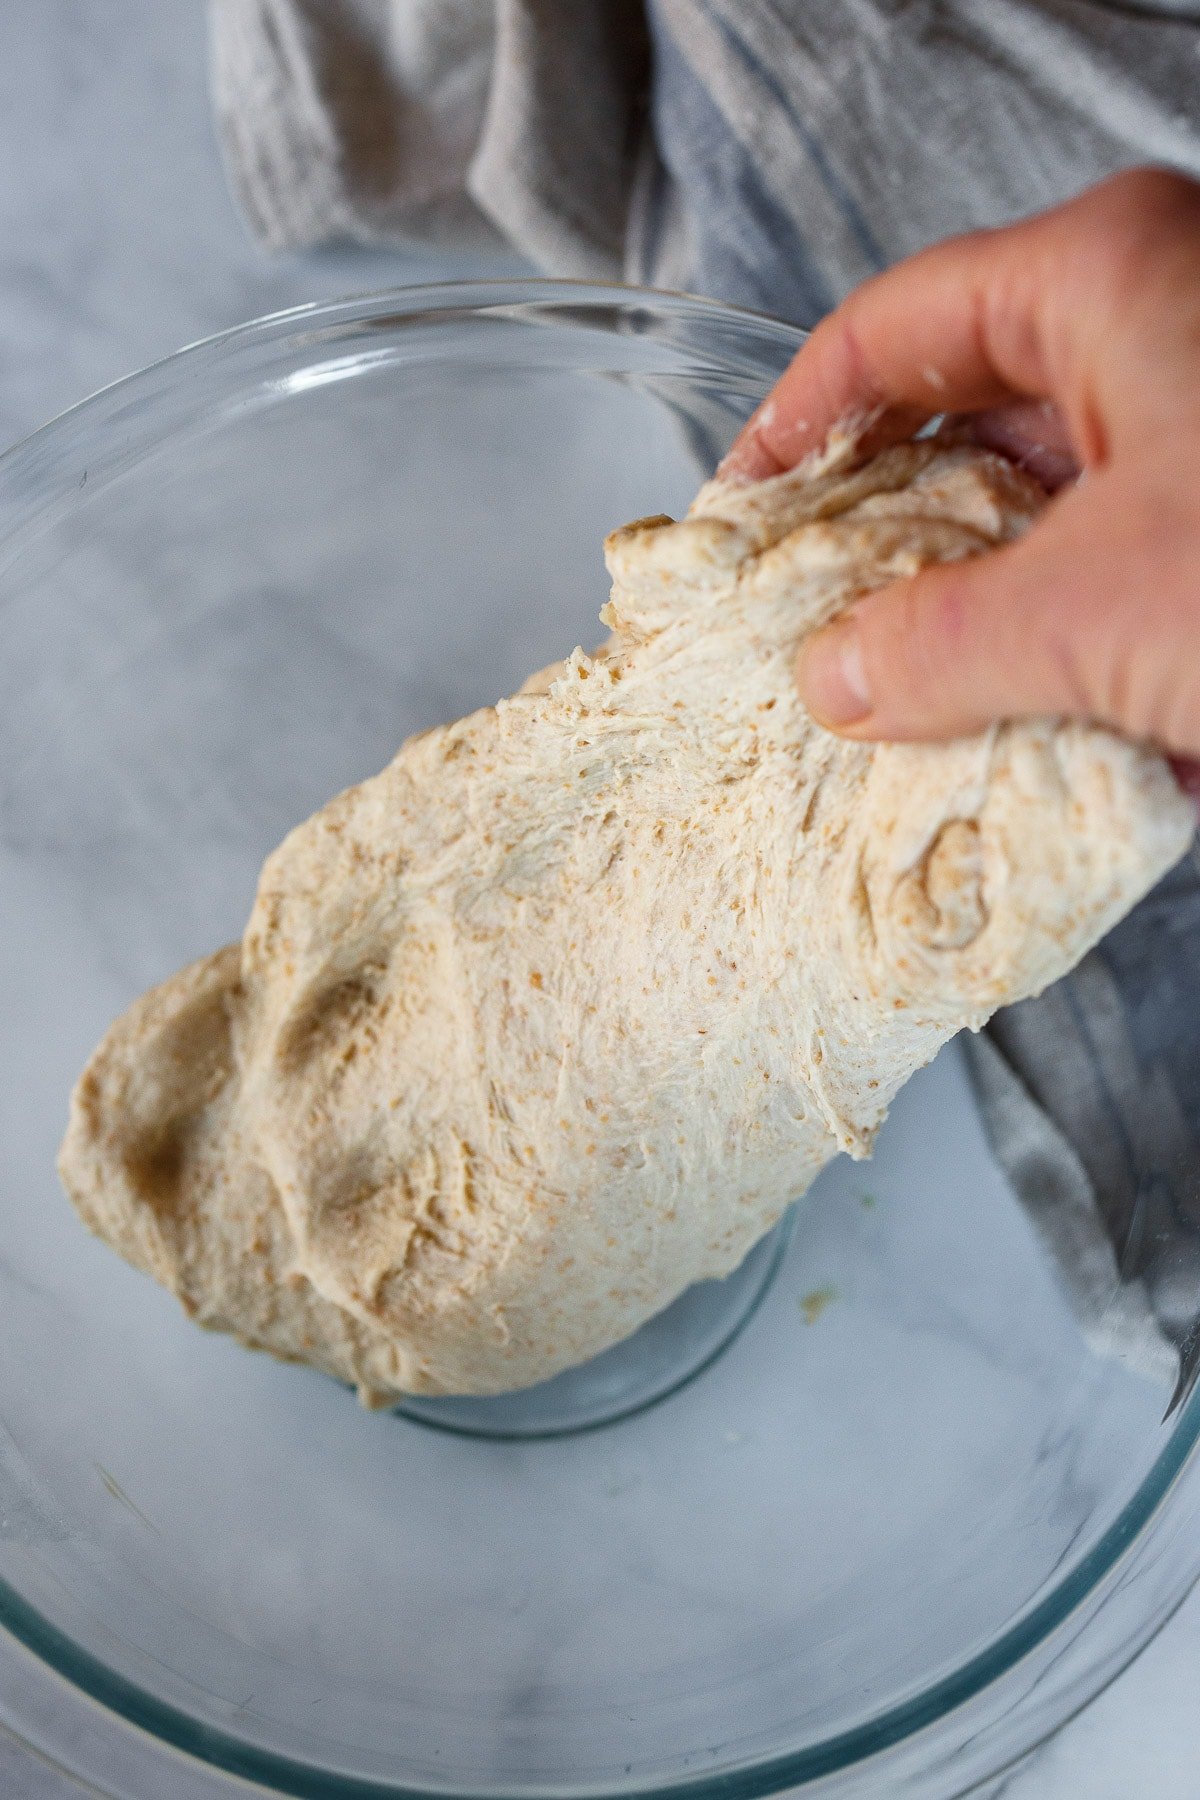 Stretching and folding the dough.